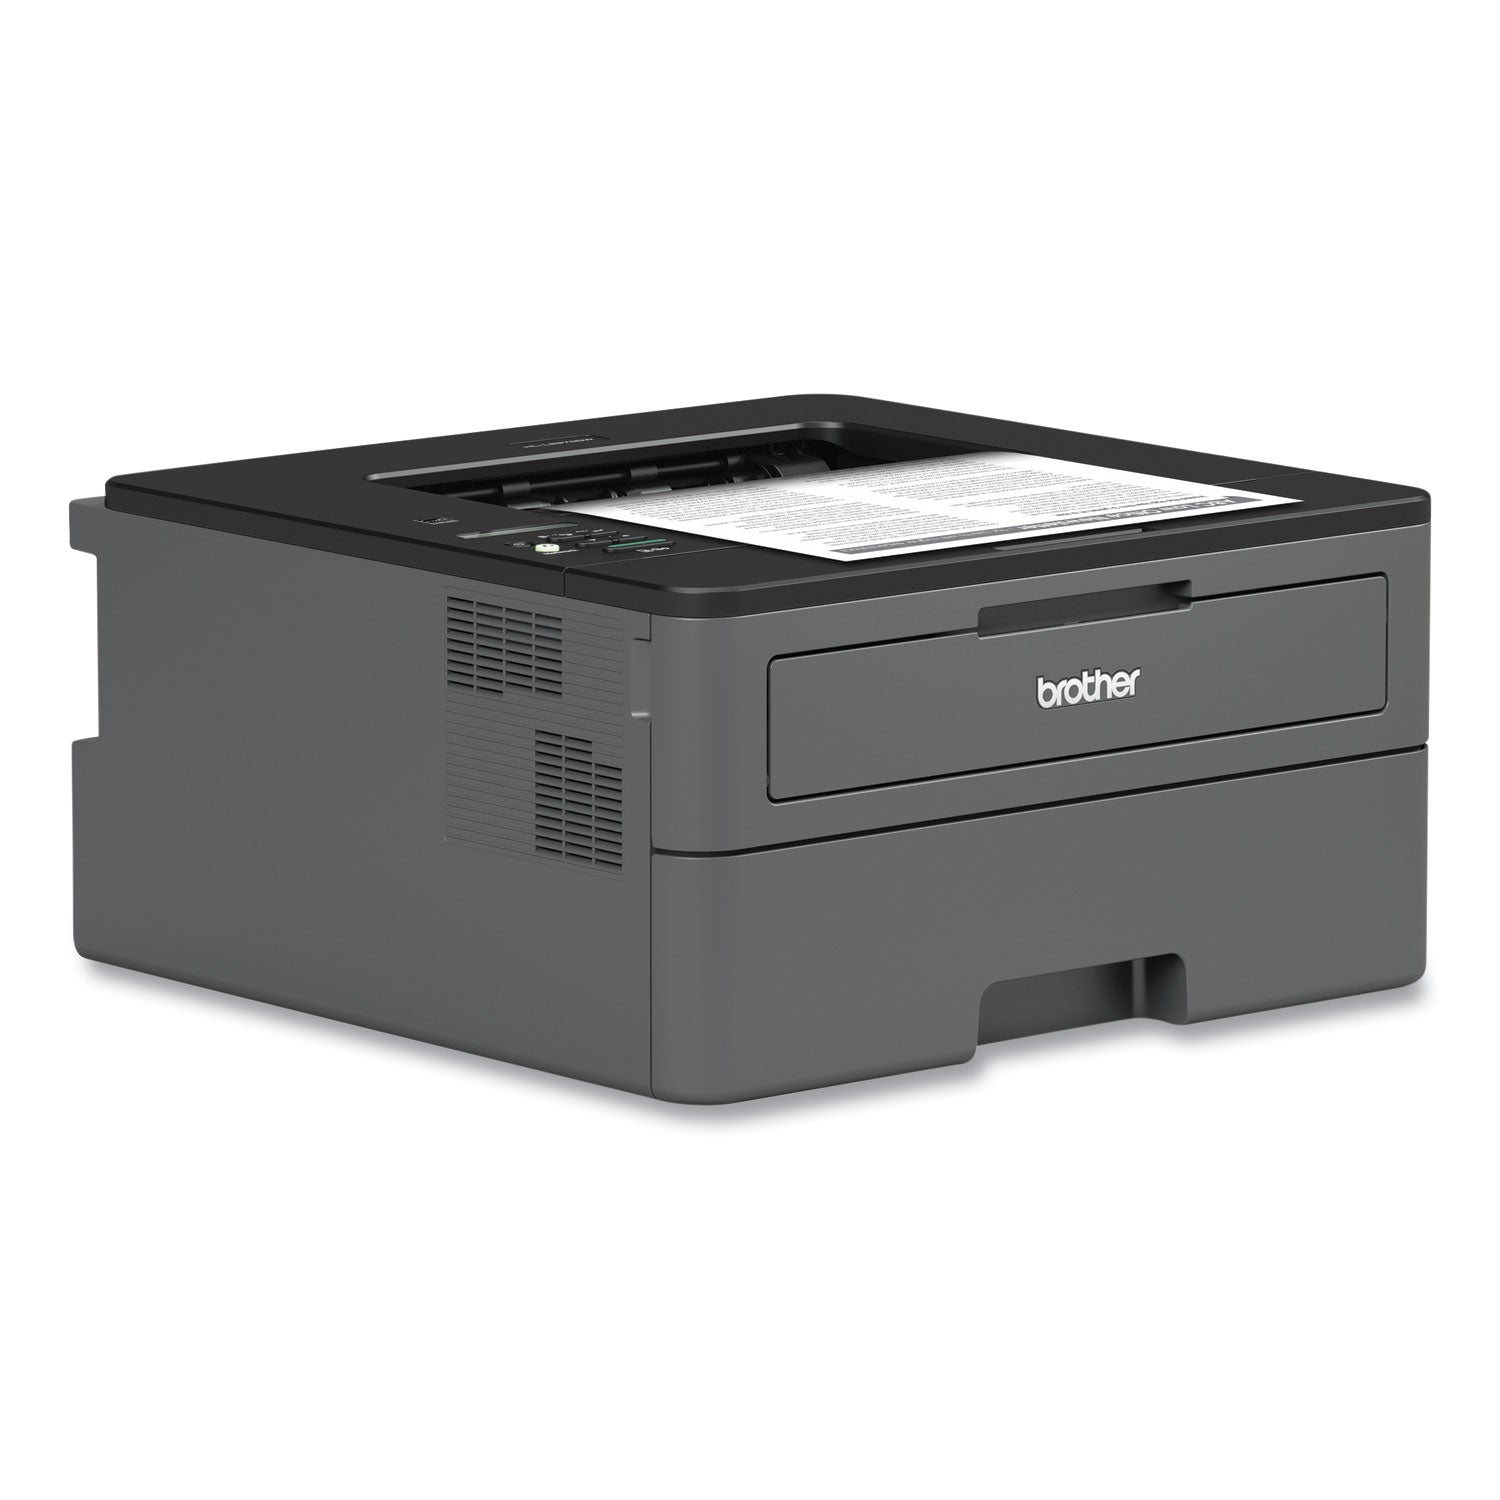 hll2370dwxl-xl-extended-print-monochrome-compact-laser-printer-with-up-to-2-years-of-toner-in-box_brthll2370dwxl - 5